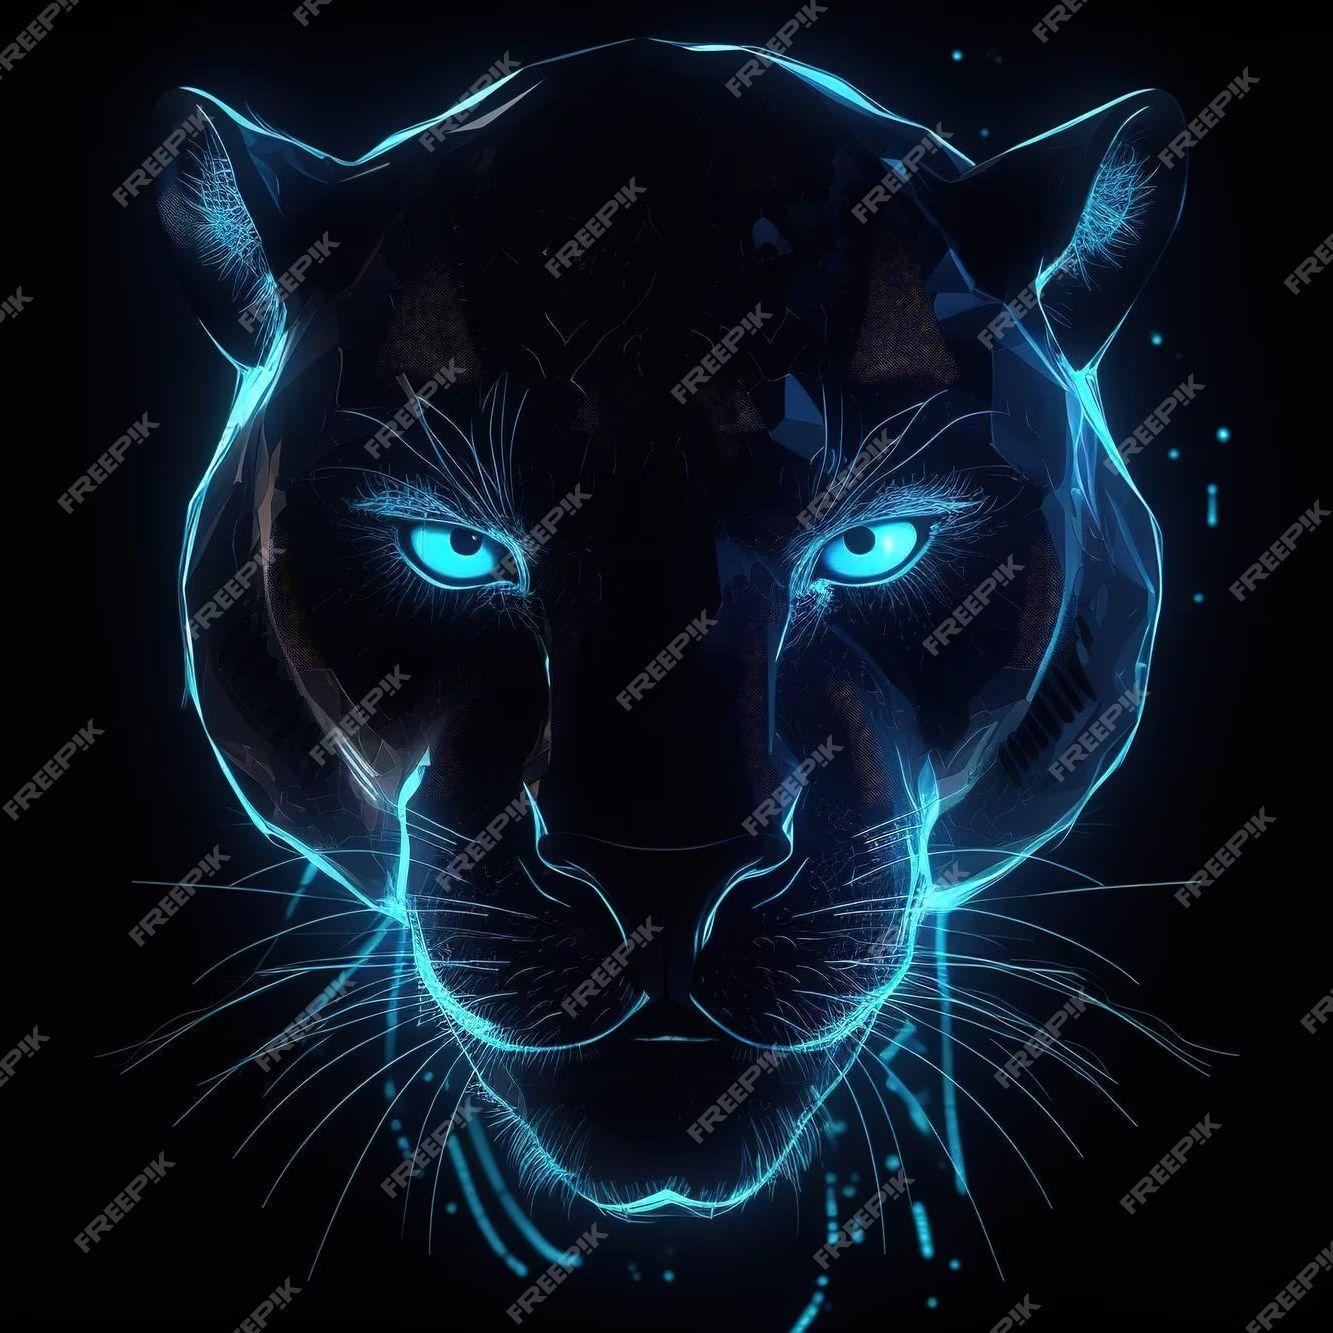 Player 2PANTHER avatar